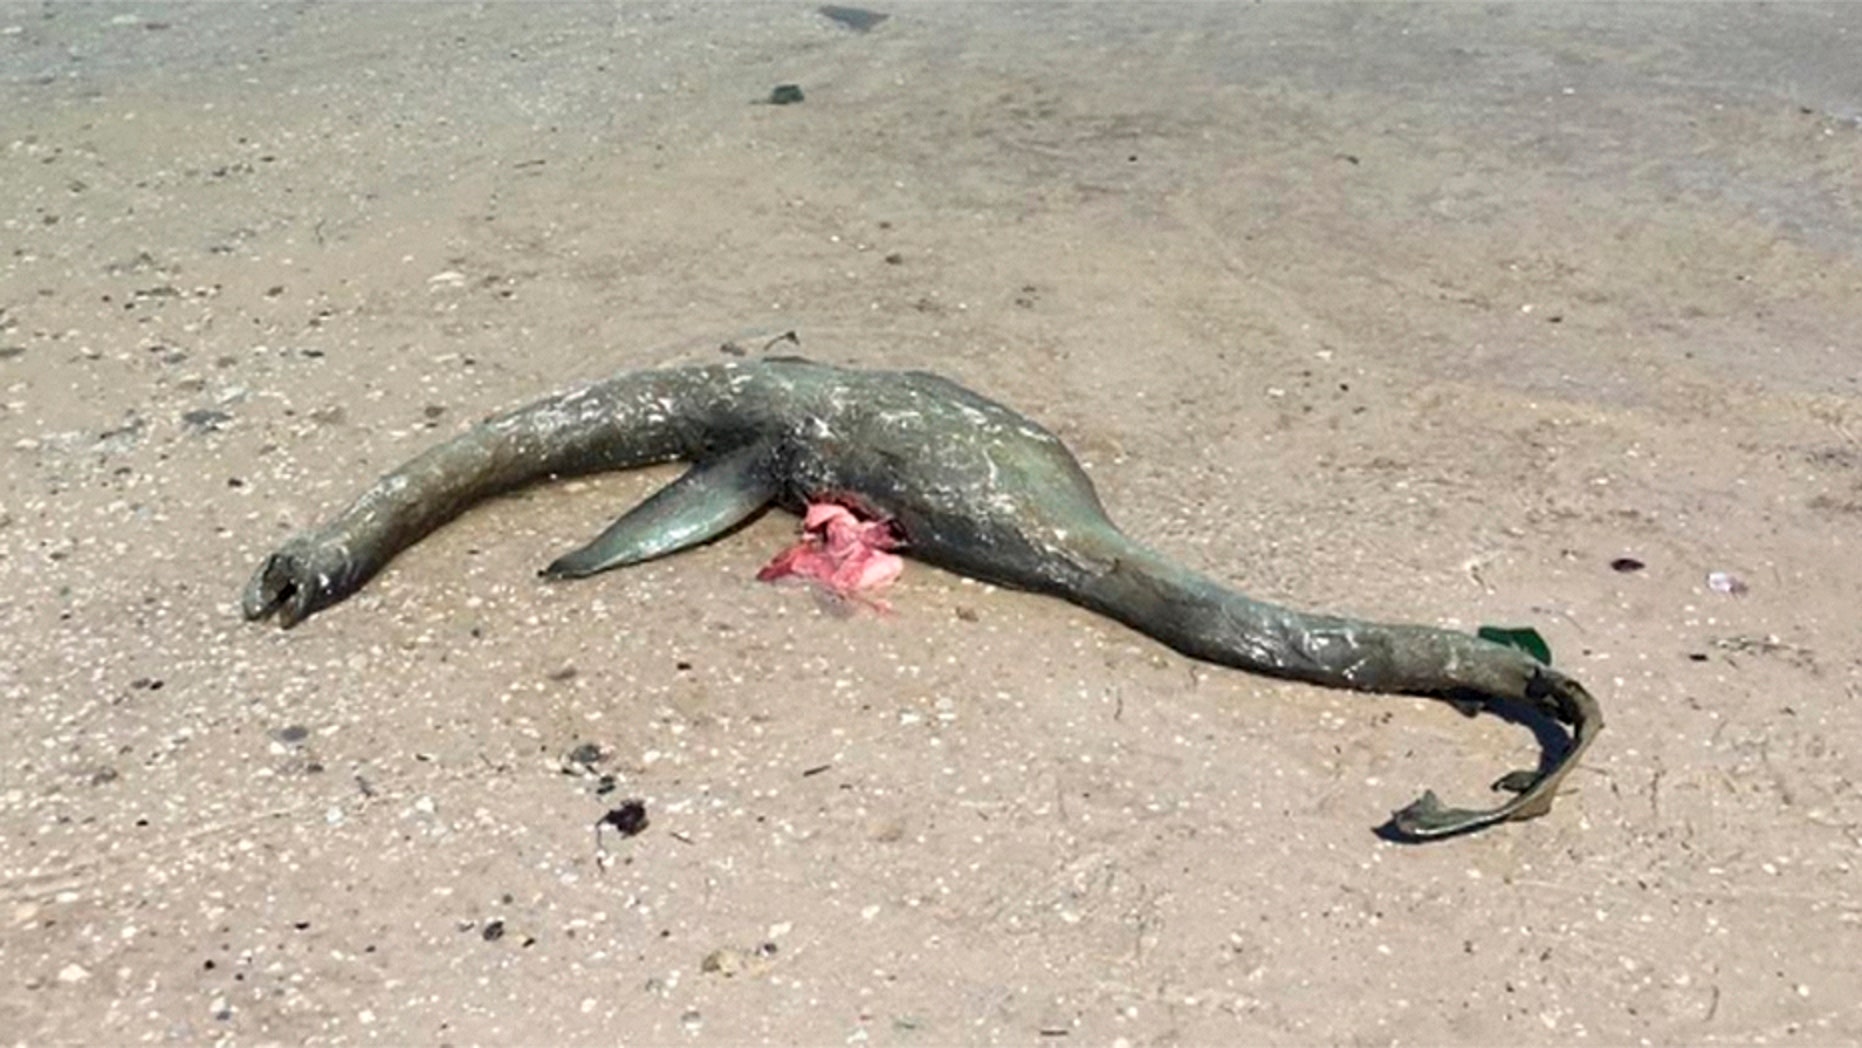 Loch Ness Monster found? Shocking pictures of unidentified sea creature